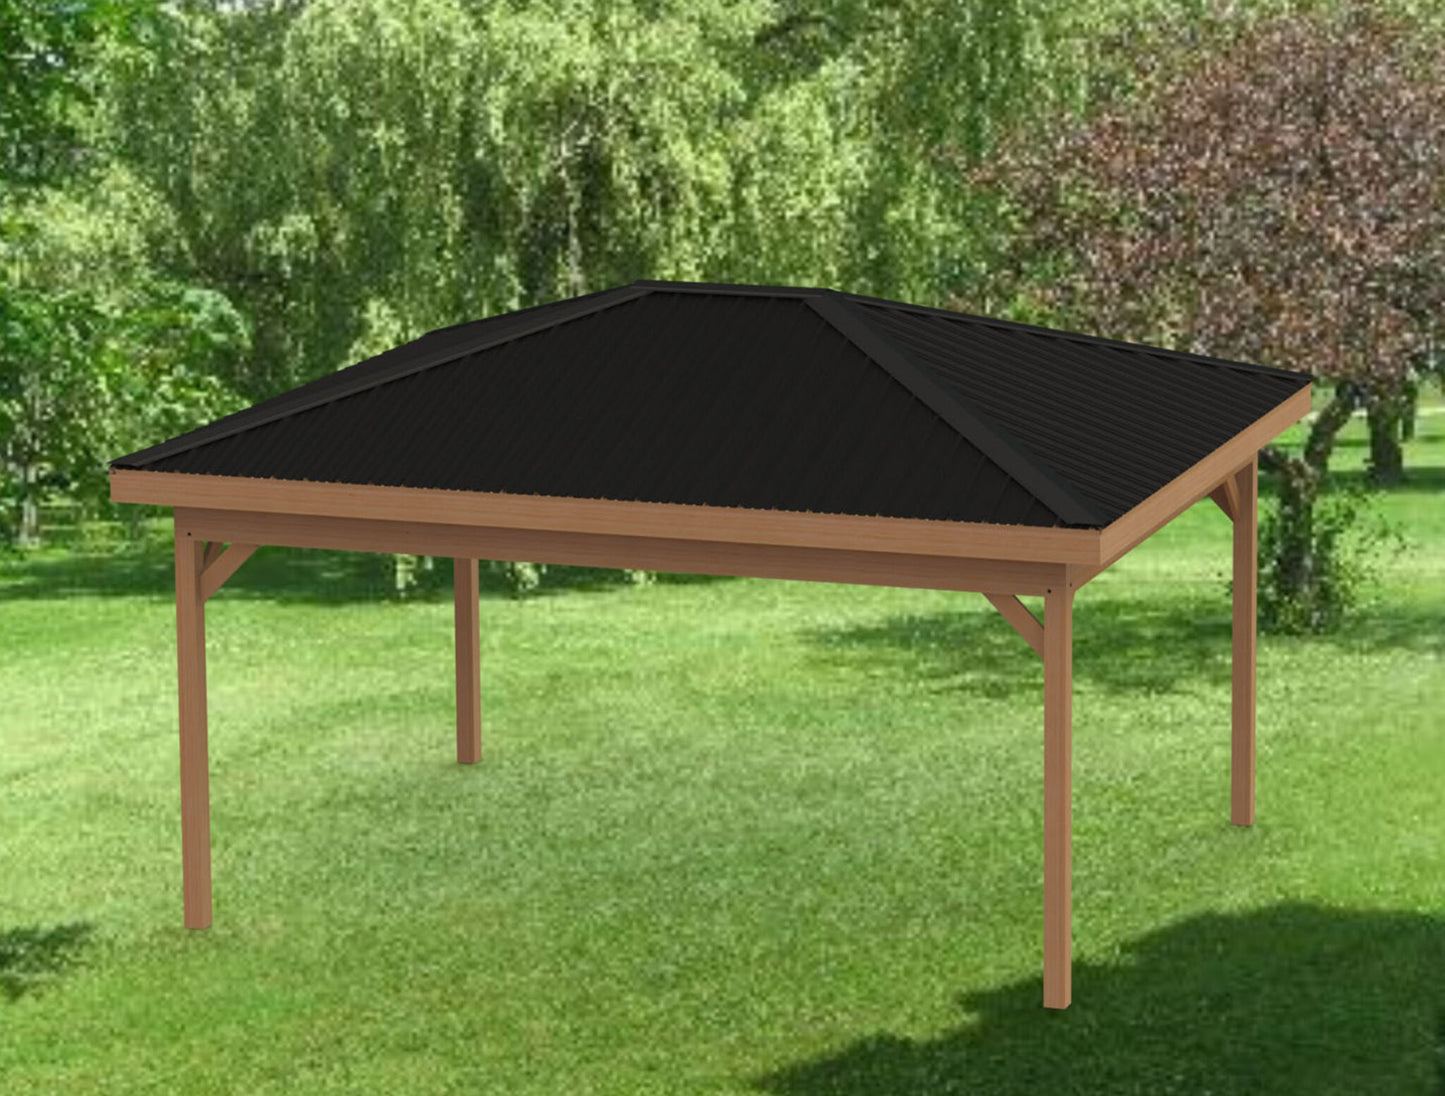 Hip Roof Gazebo Building Plans-Perfect for Hot Tubs - 16' x 20' with 4:12 Pitch Metal Roof